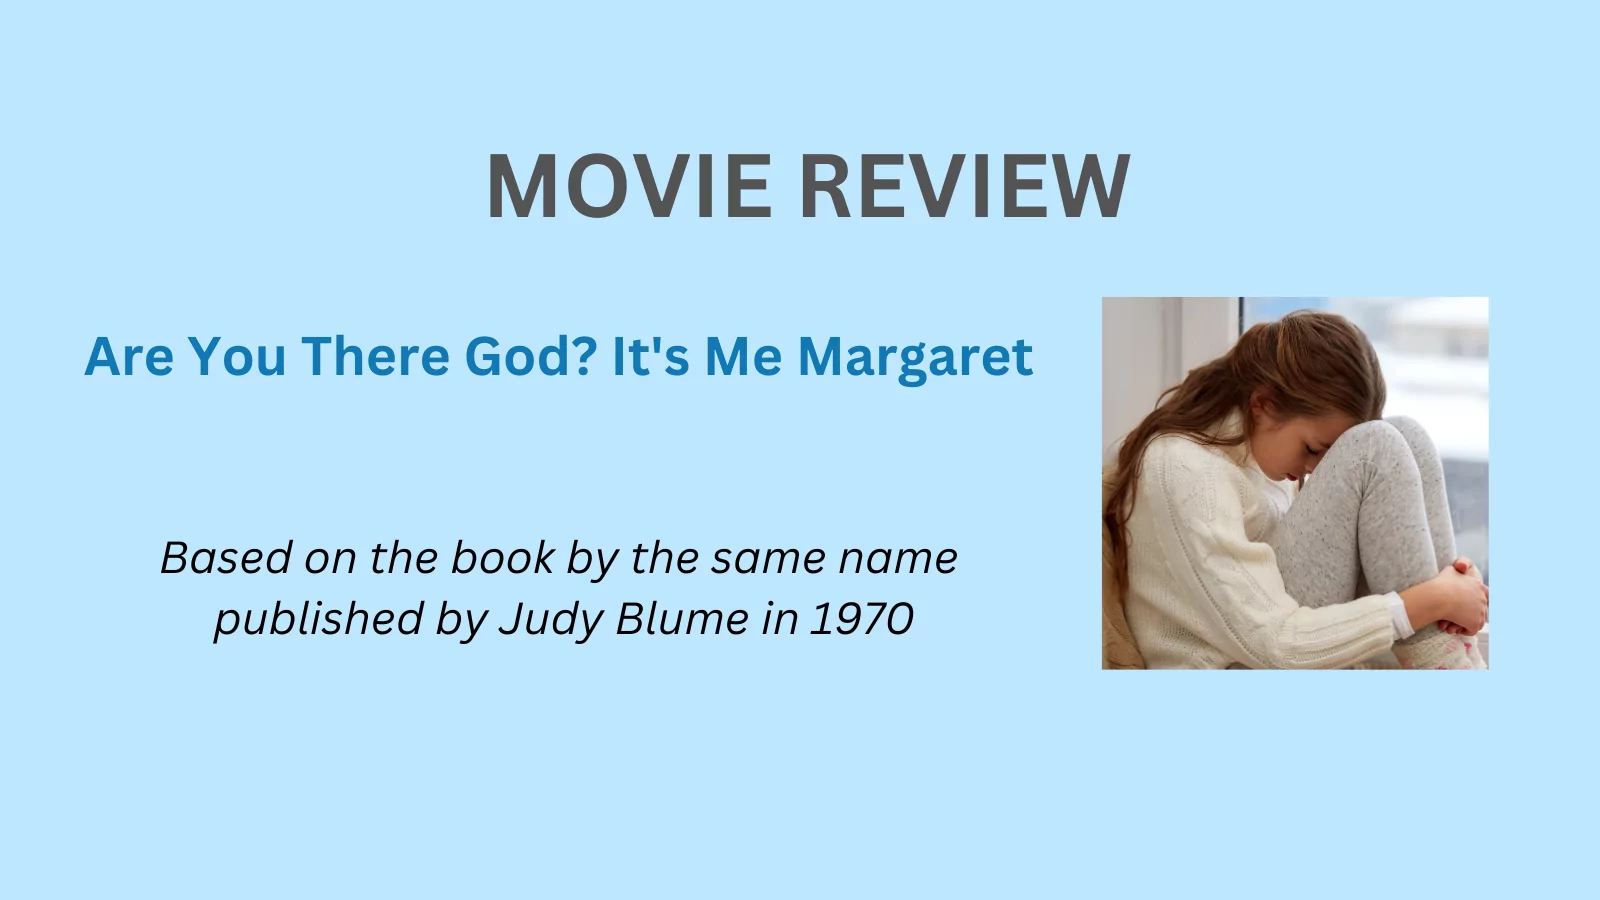 are you there god? It's me margaret